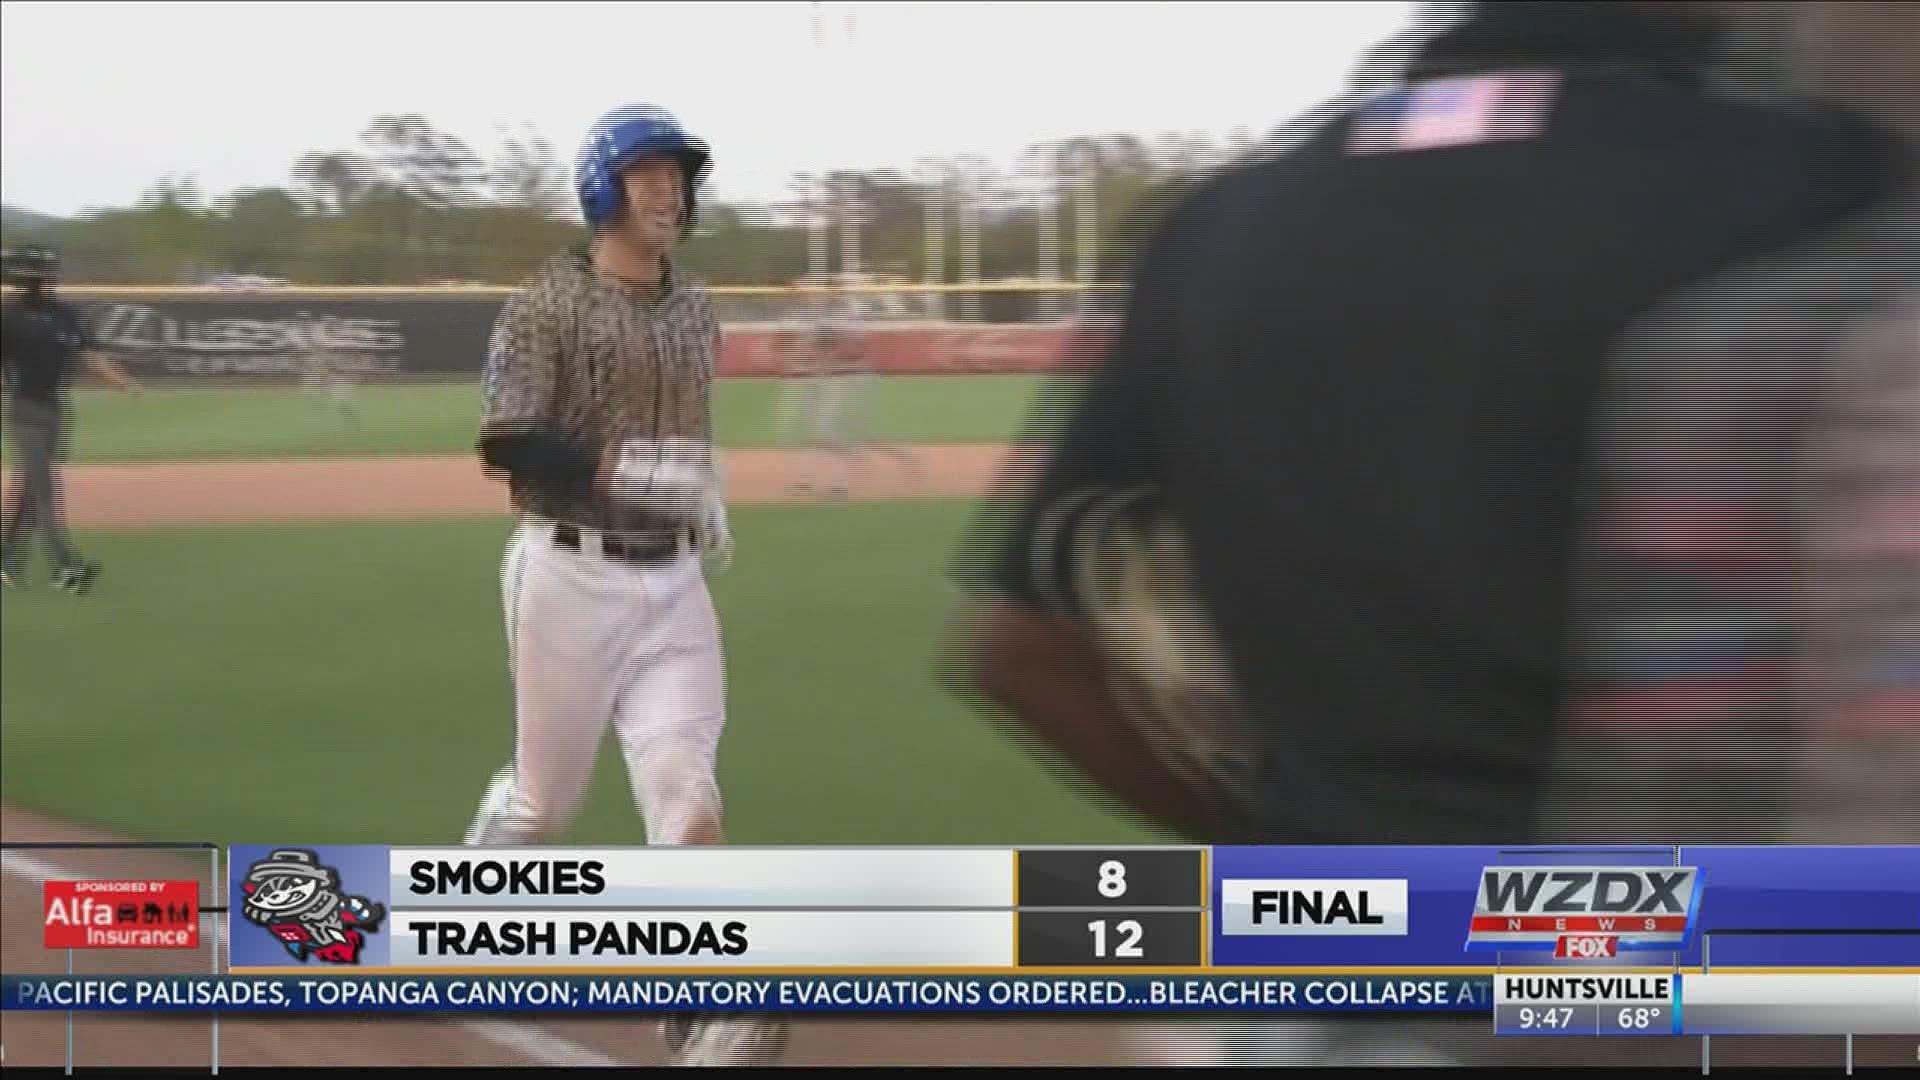 In a wild, back-and-forth affair that came down to the final at-bat, the Trash Pandas earned the first walk-off win in franchise history, 12-8 in 13 innings.